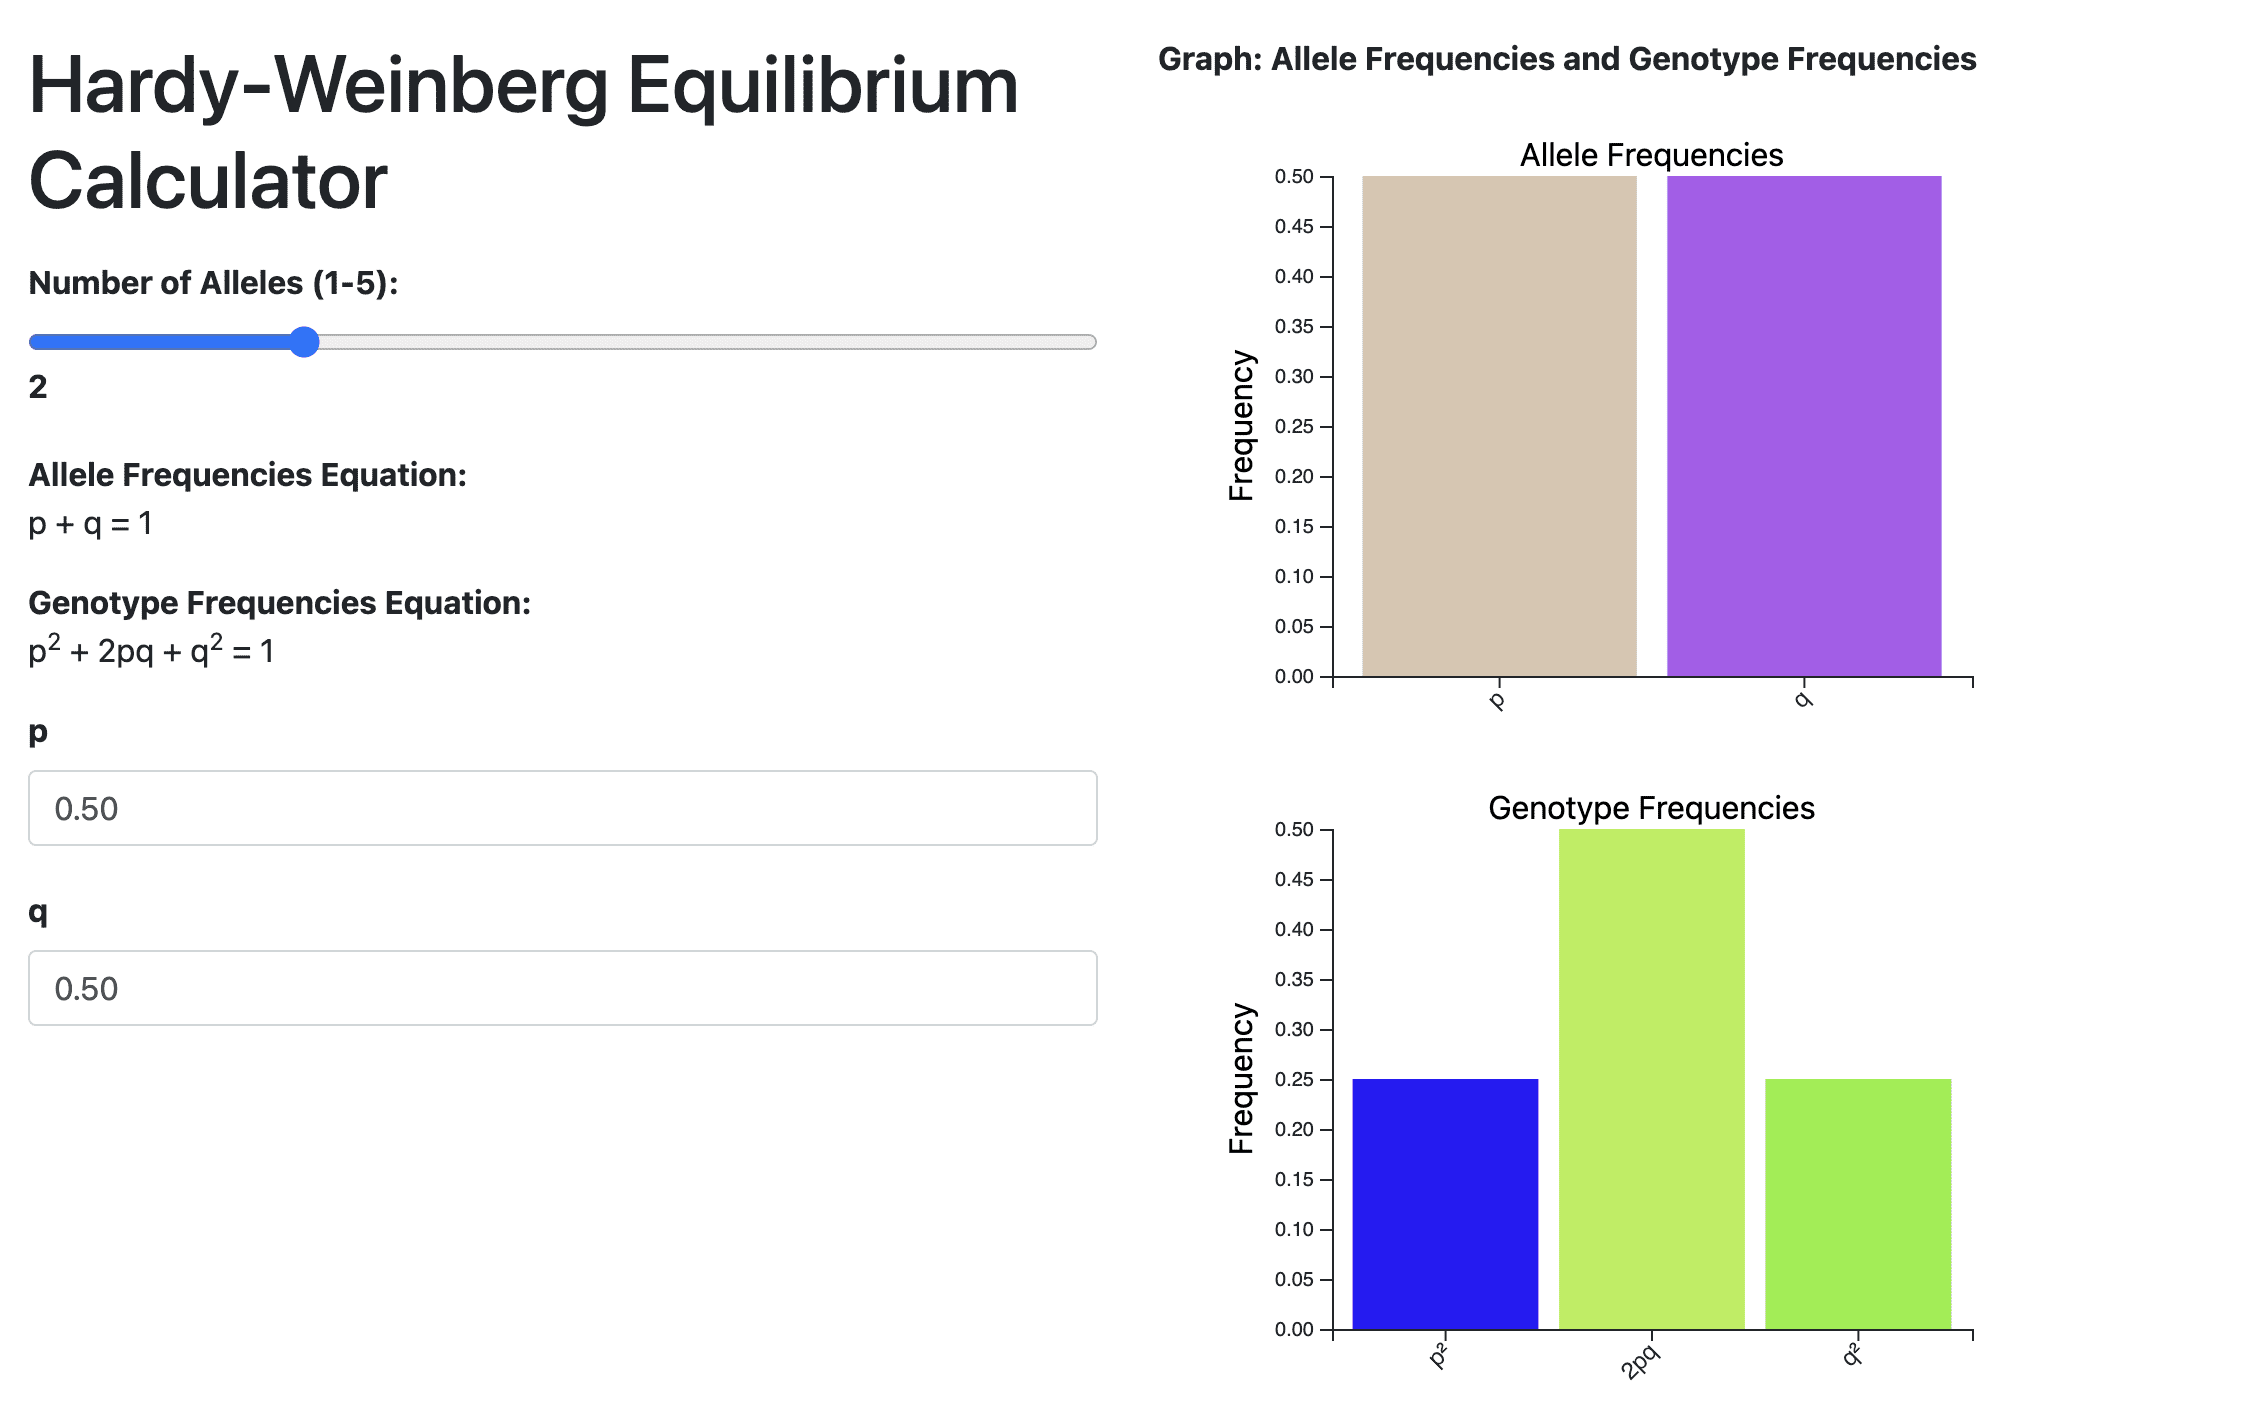 Hardy-Weinberg Equilibrium Calculator for 2 alleles